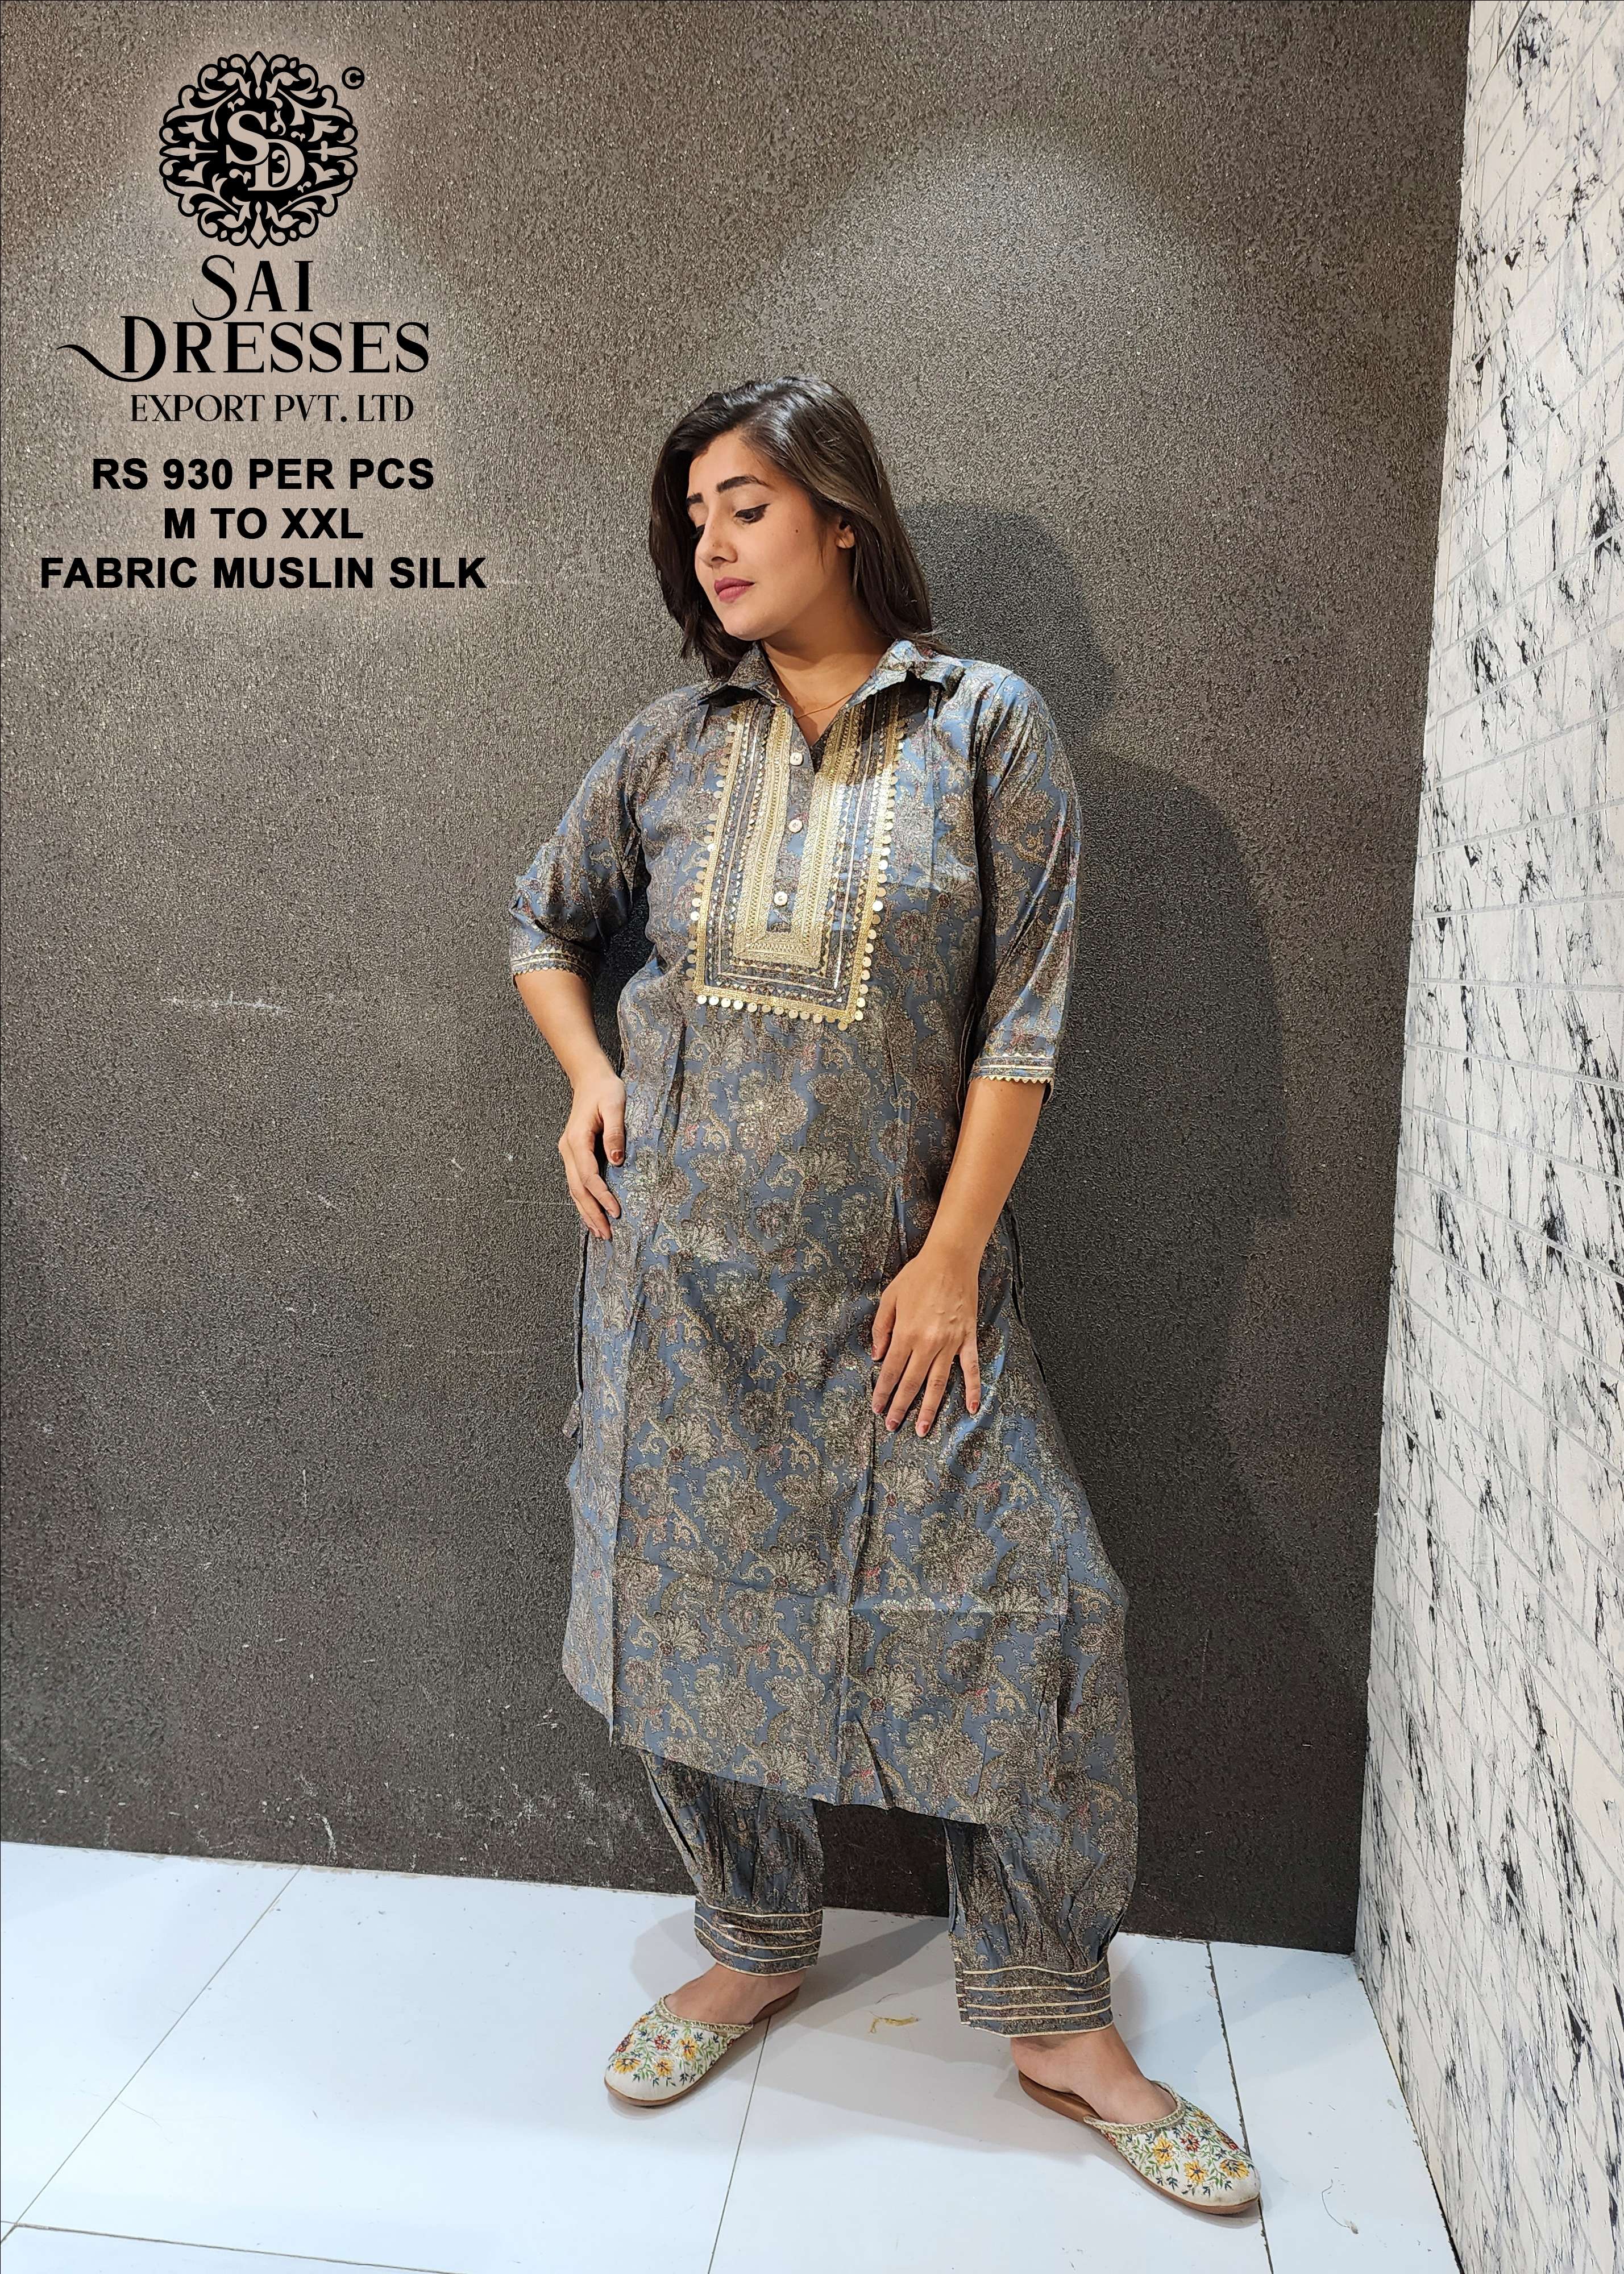 SAI DRESSES PRESENT D.NO 2062 READY TO EXCLUSIVE TRENDY WEAR PATHANI KURTA WITH AFGHANI PANT STYLE COMBO COLLECTION IN WHOLESALE RATE IN SURAT